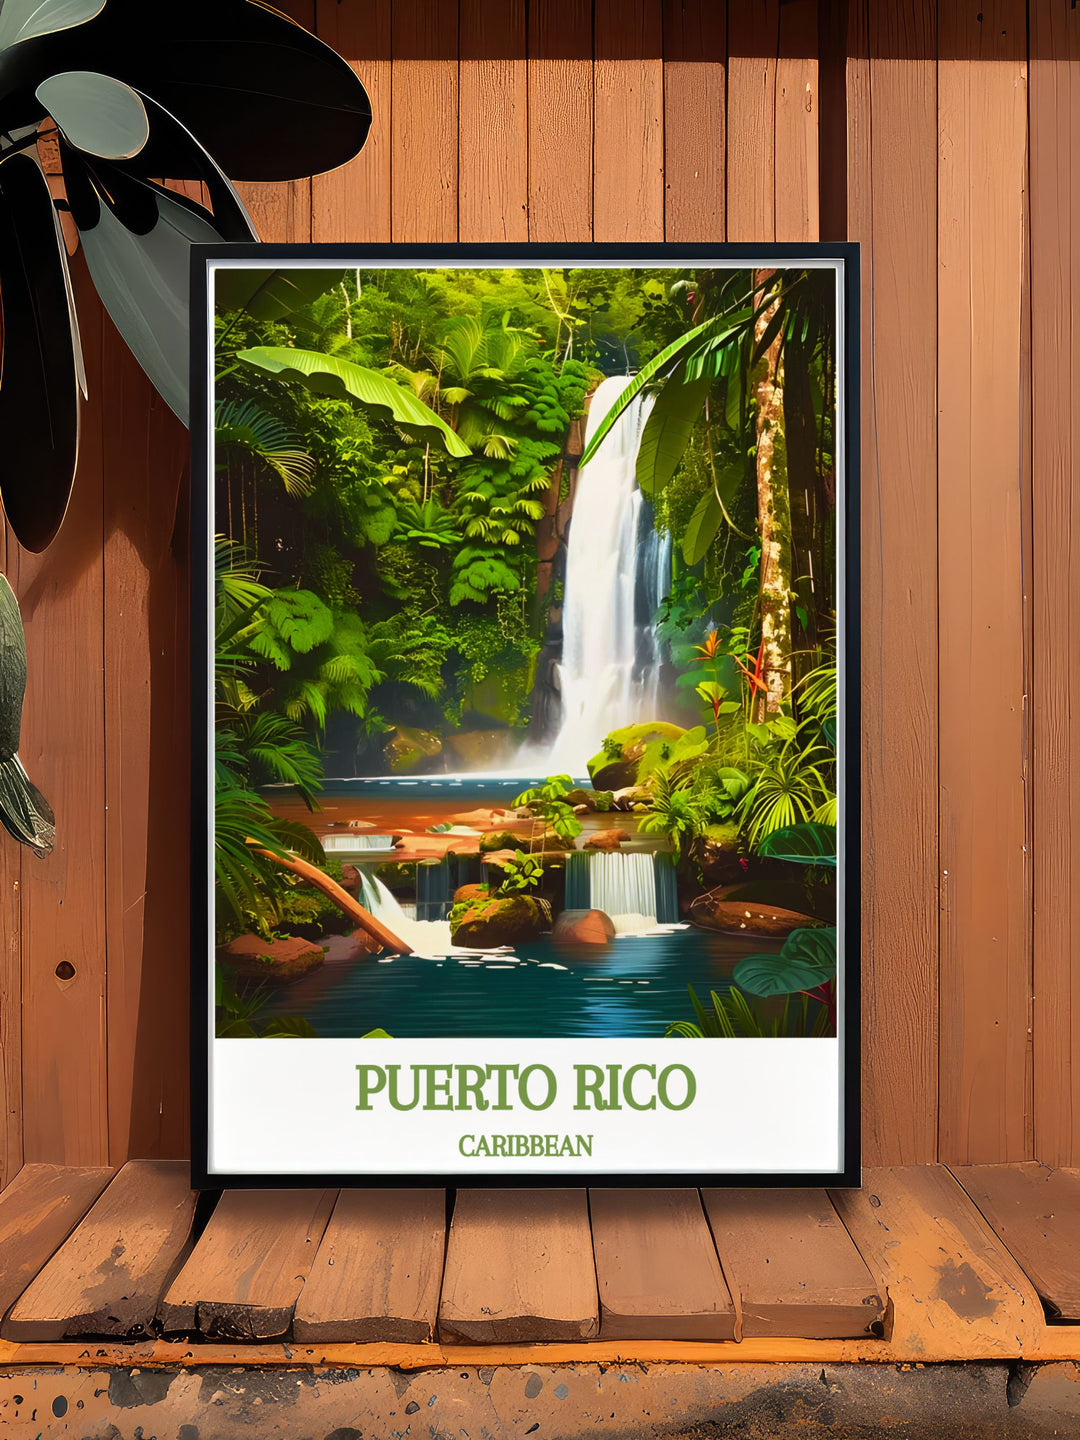 Elegant CARIBBEAN, El Yunque National Forest poster with a vintage design. Ideal for Arecibo photography lovers and those looking for personalized gifts. Adds a vibrant touch to home decor with its striking color palette.